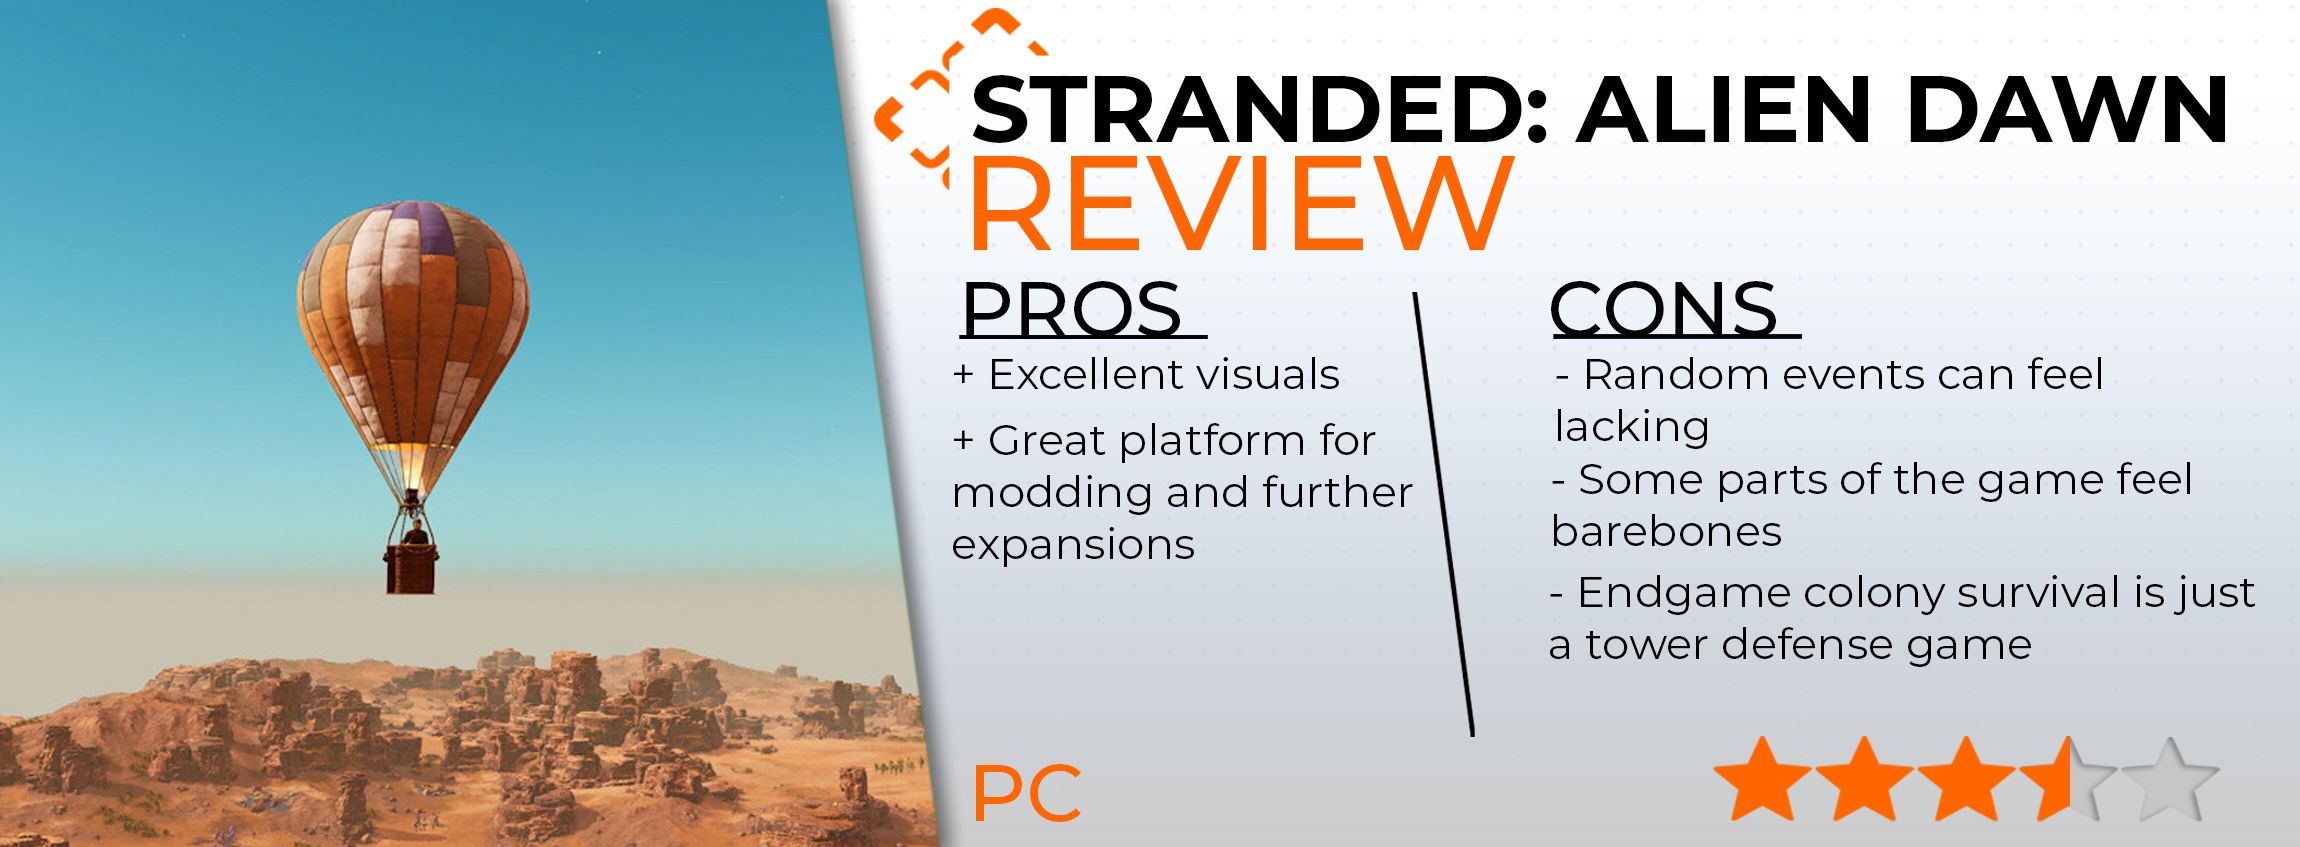 stranded_alien_dawn_review_card